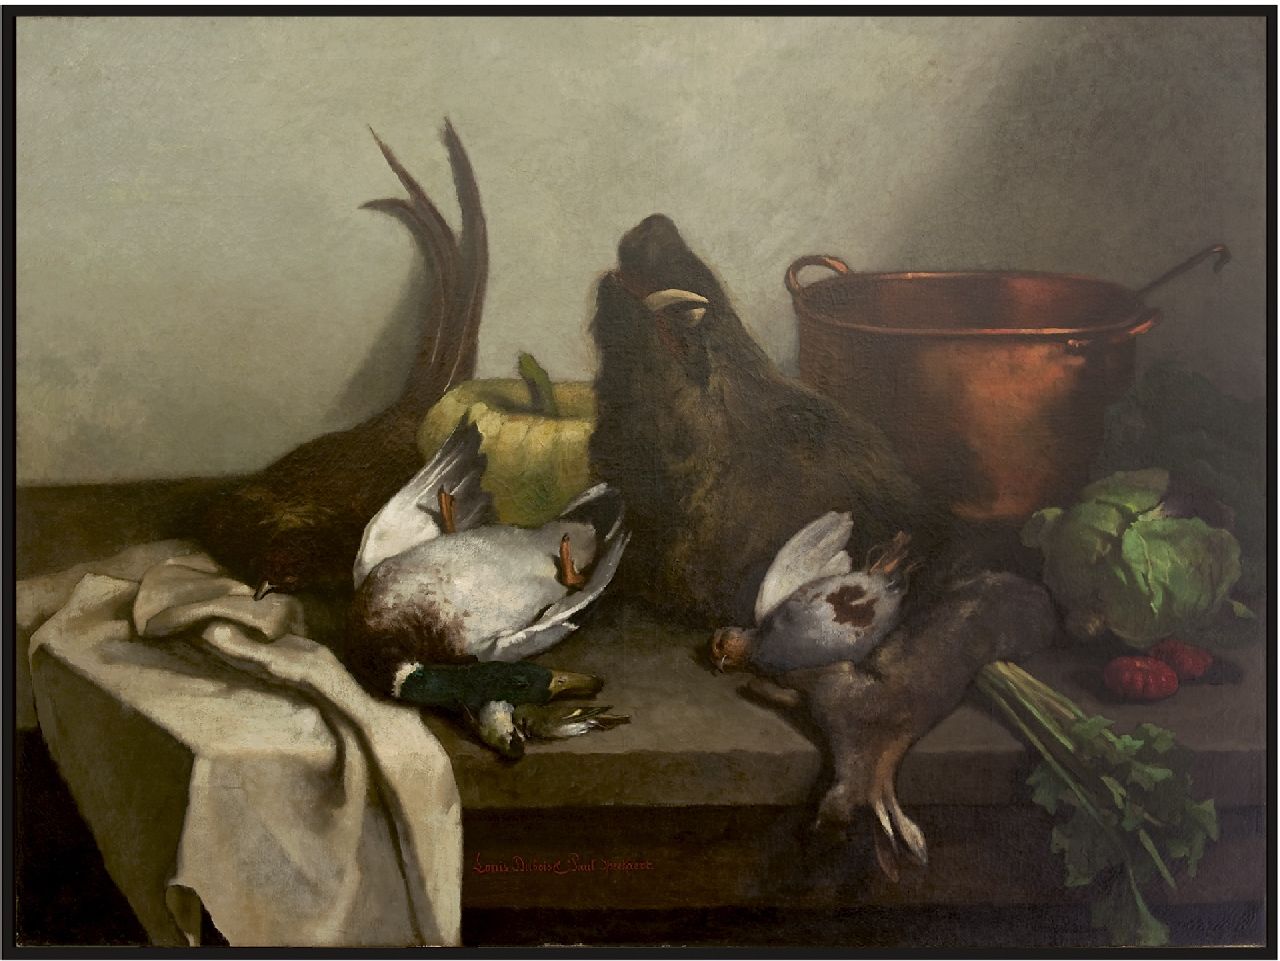 Dubois/Speekaert L./L.  | Louis/Léopold Dubois/Speekaert | Paintings offered for sale | Stil life with poultry, oil on canvas 105.5 x 141.0 cm, signed l.c. by both artists